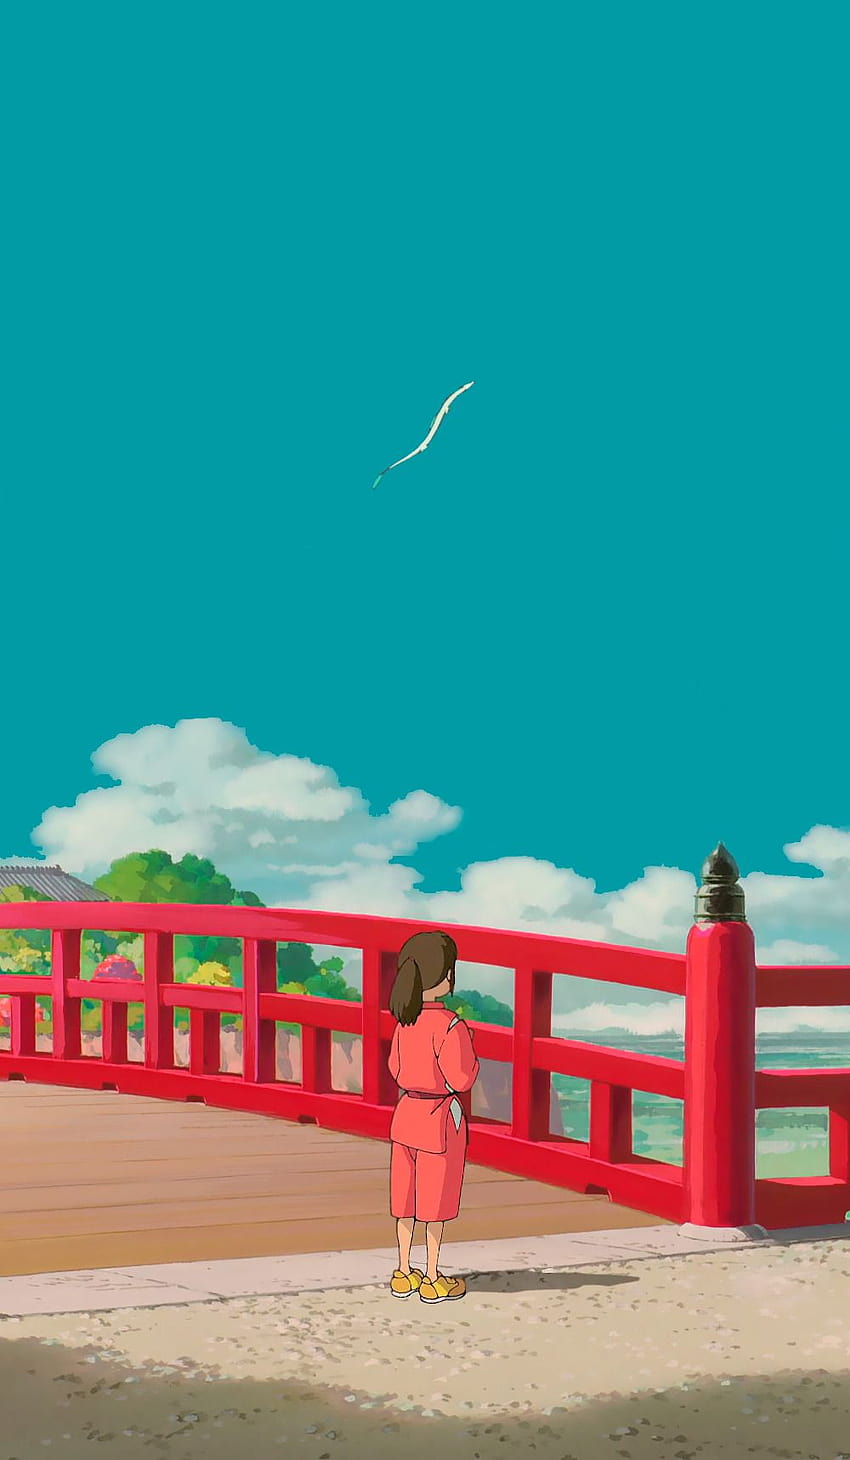 Spirited Away Wallpaper 74 pictures